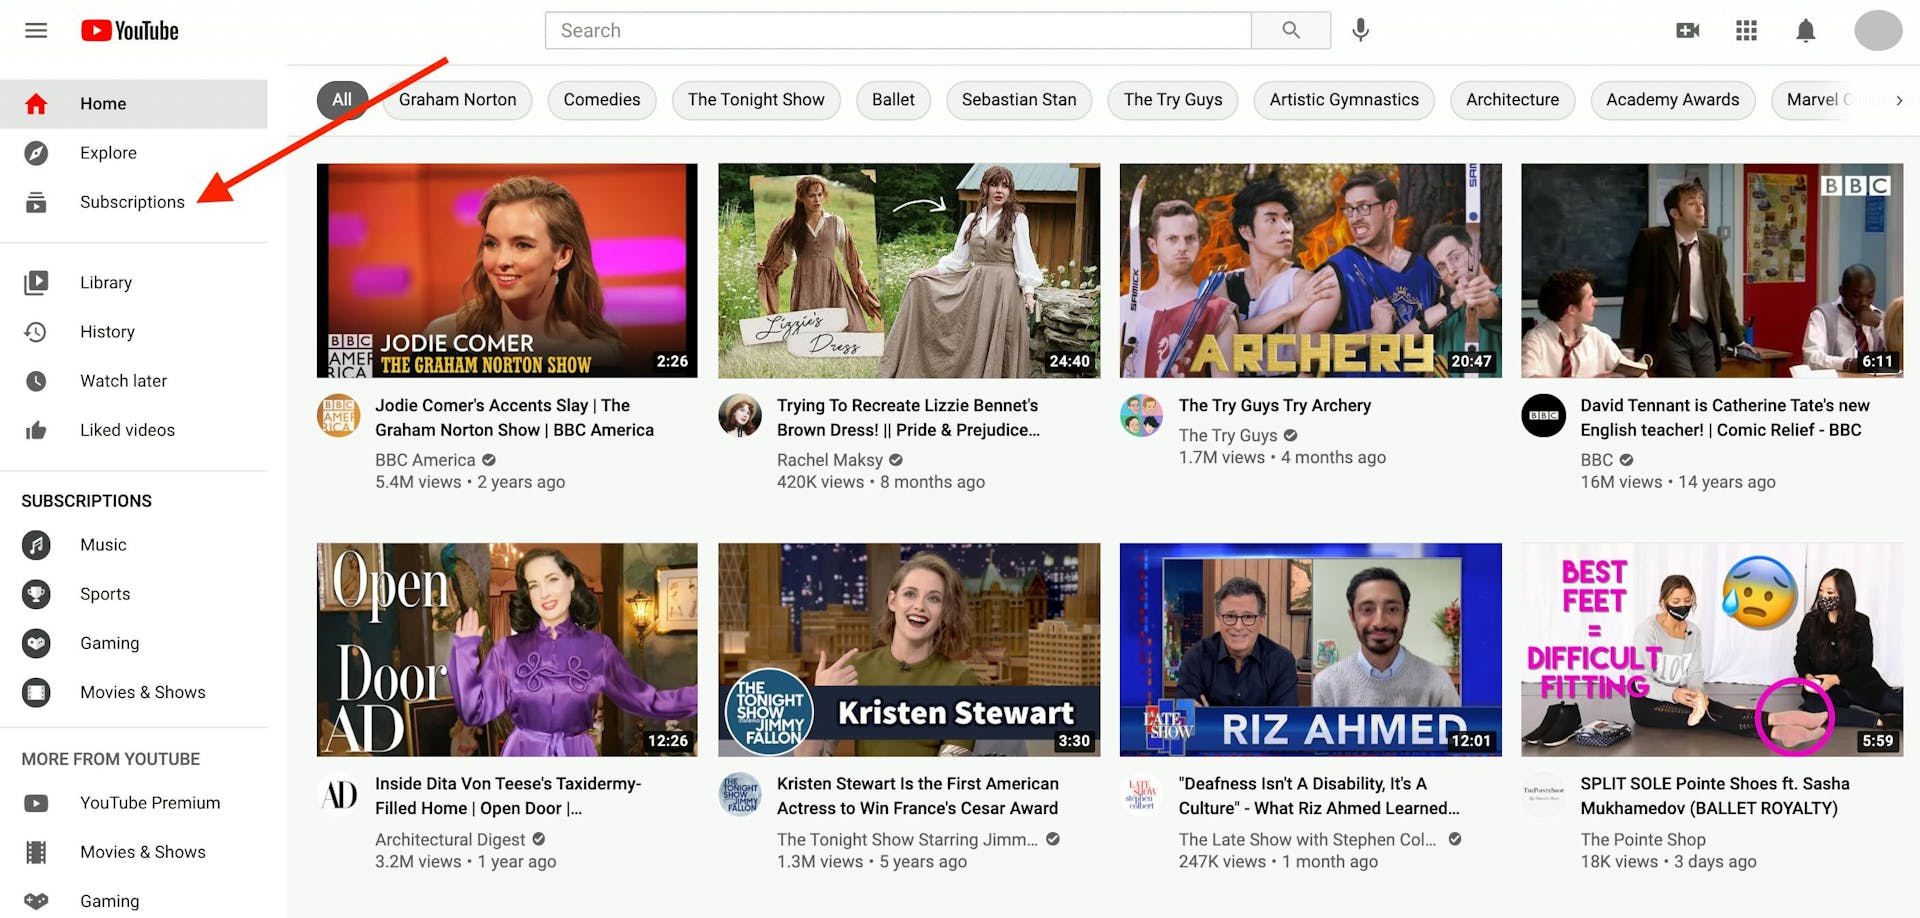 Arrow pointing to subscription button on YouTube homepage, from which you can access a view of all the channels you've subscribed to